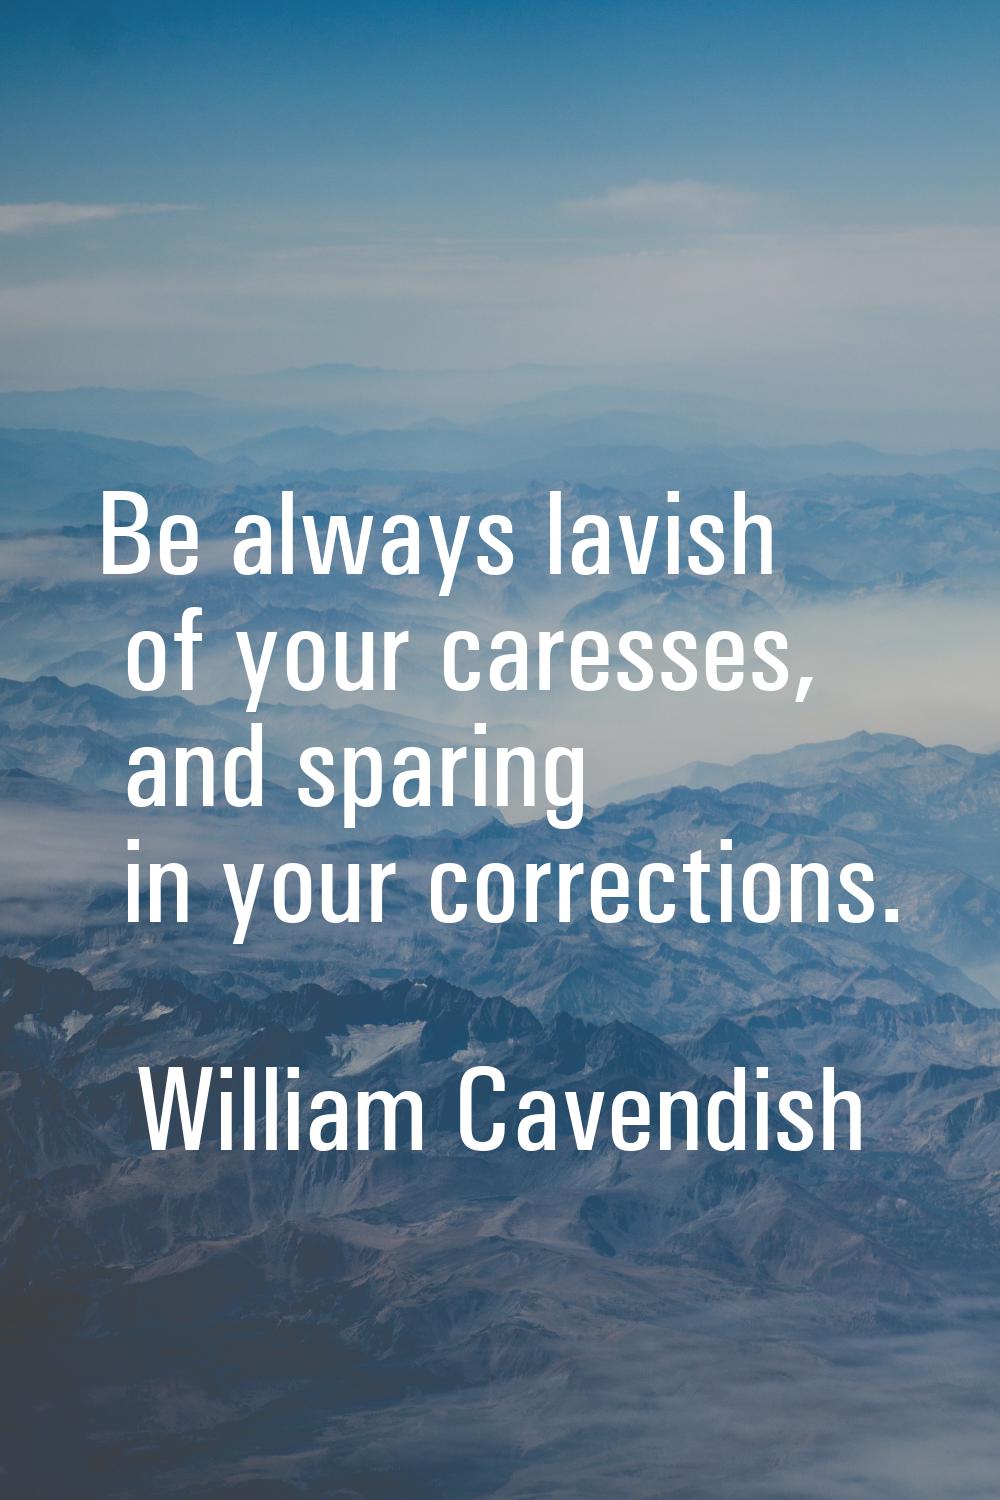 Be always lavish of your caresses, and sparing in your corrections.